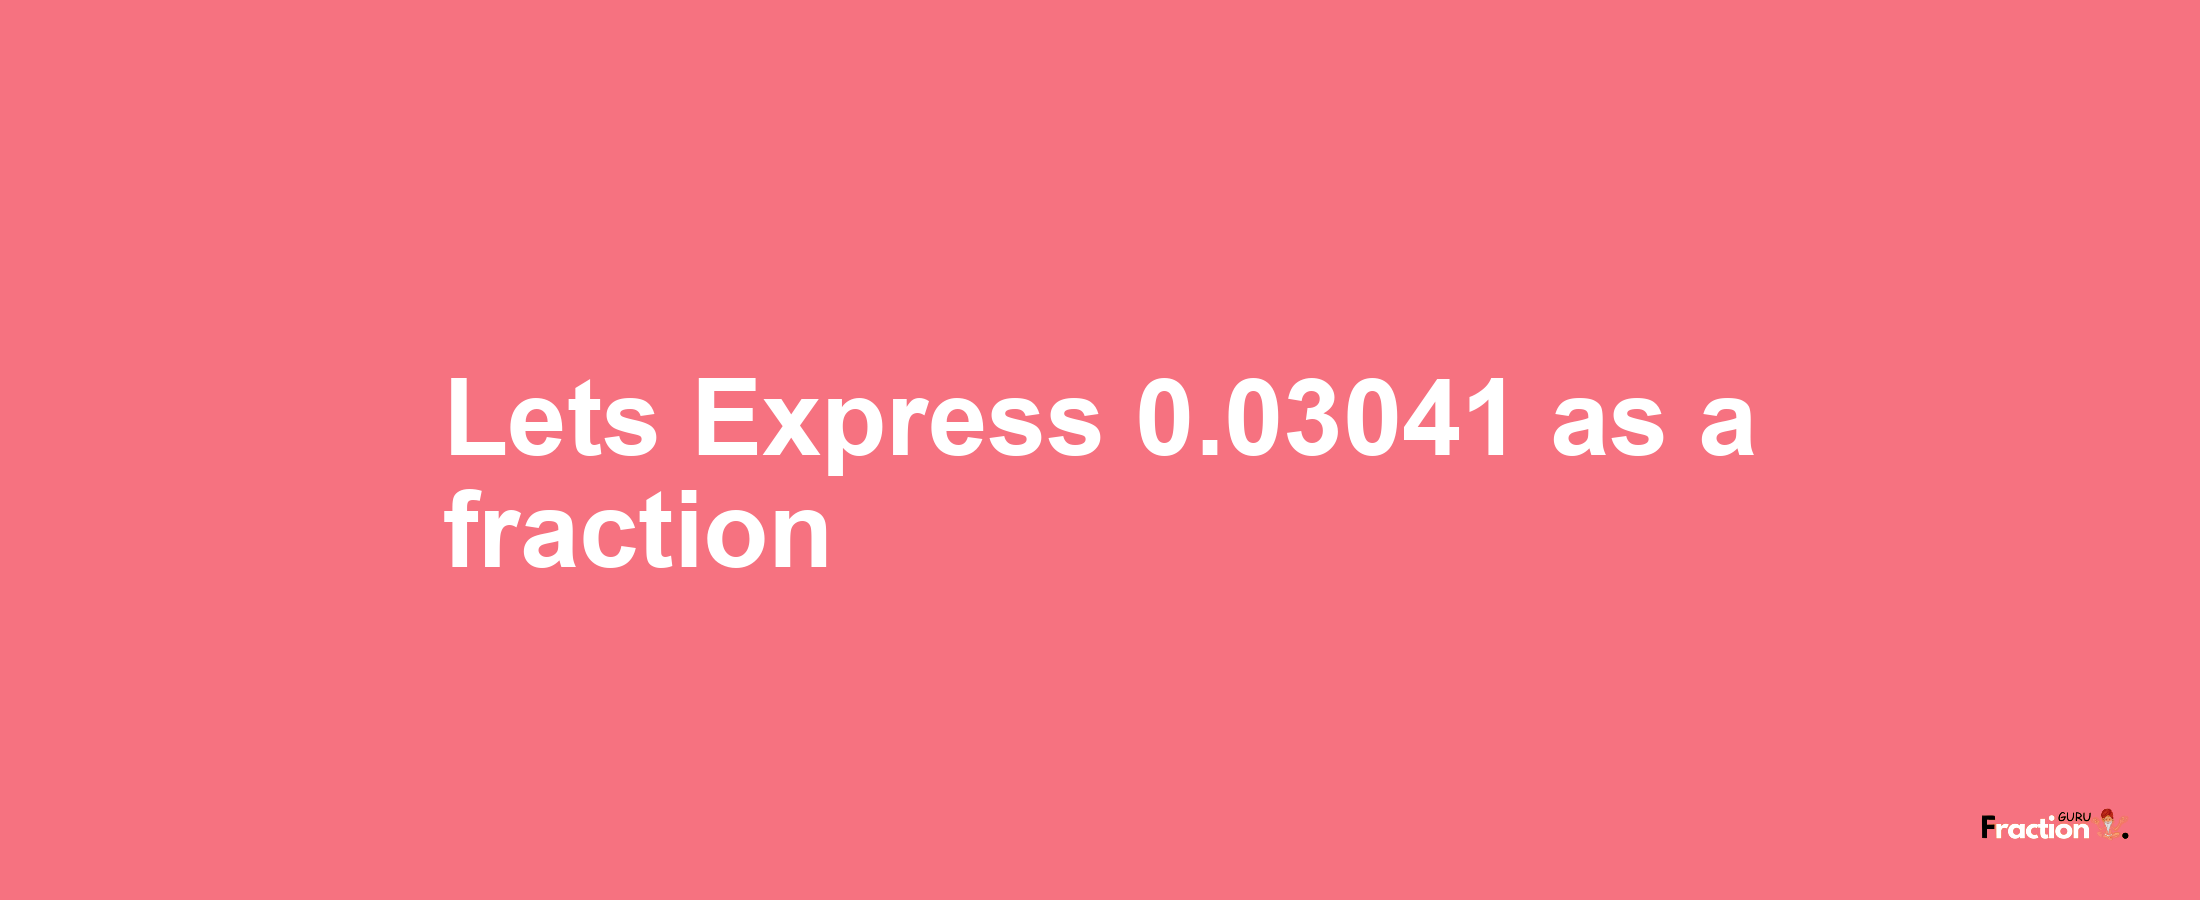 Lets Express 0.03041 as afraction